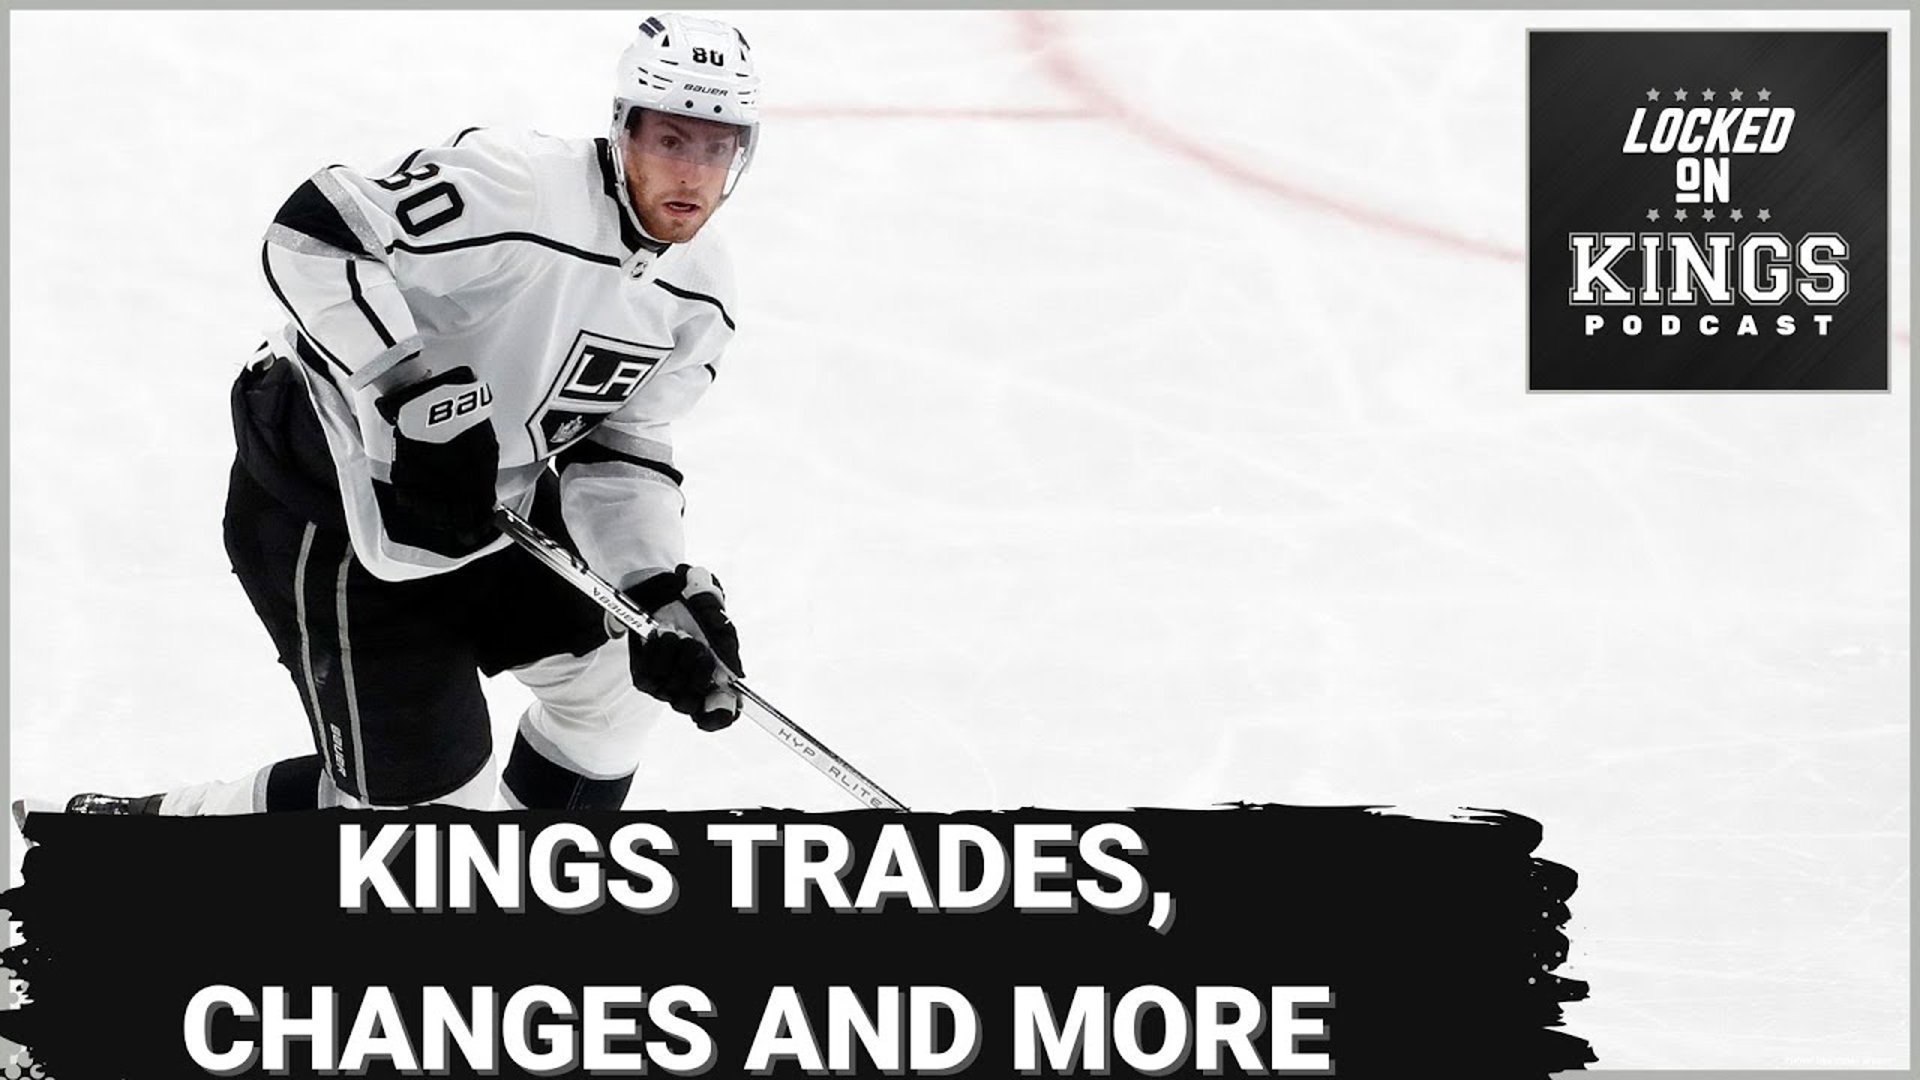 We look at the Pierre Luc Dubois trade, the NHL draft and offseason moves for the Kings and more with Jesse Cohen of the All the Kings Men podcast